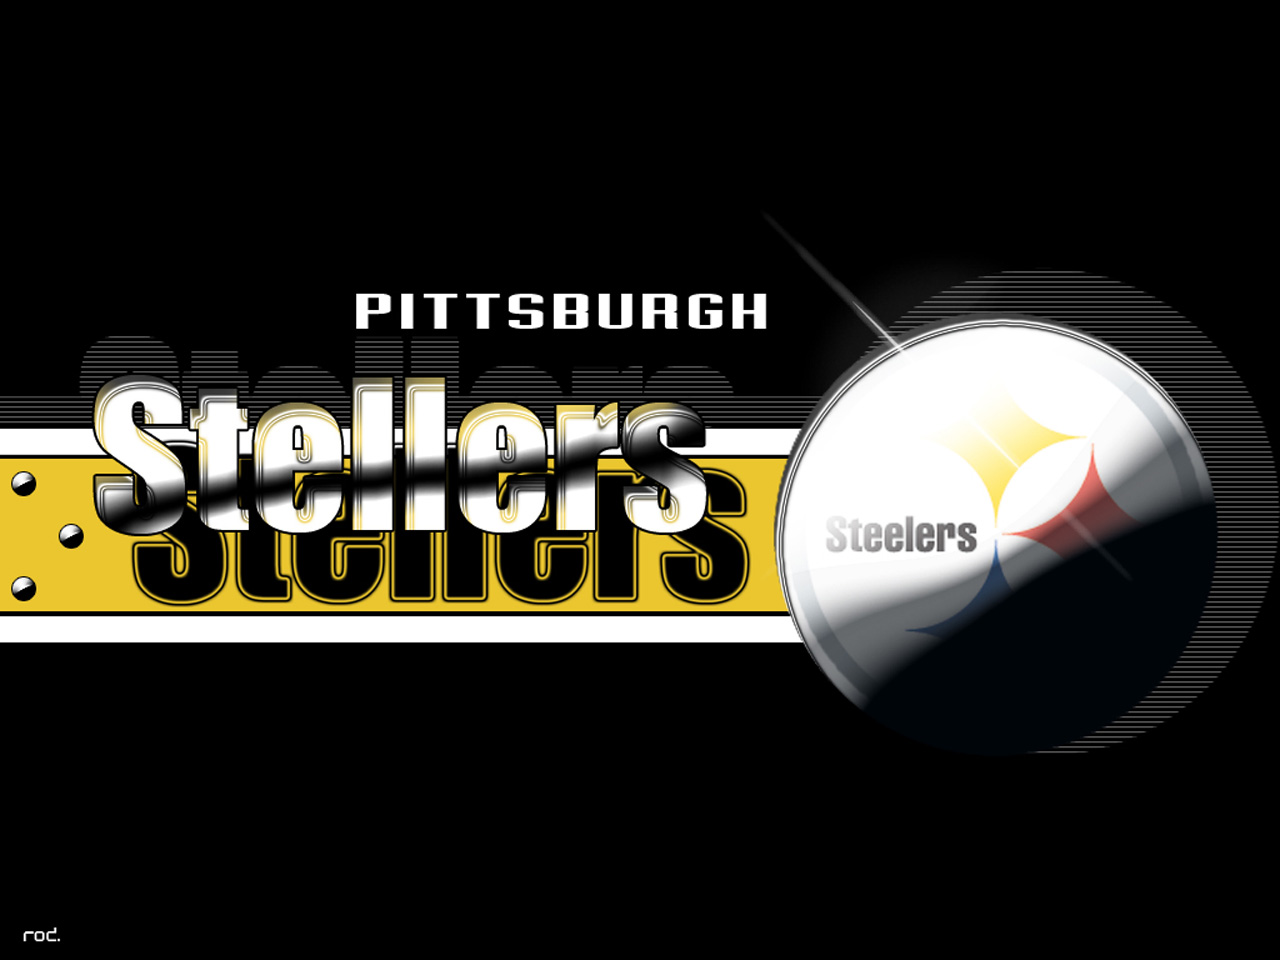 pittsburgh steelers wallpaper,text,yellow,font,logo,graphics